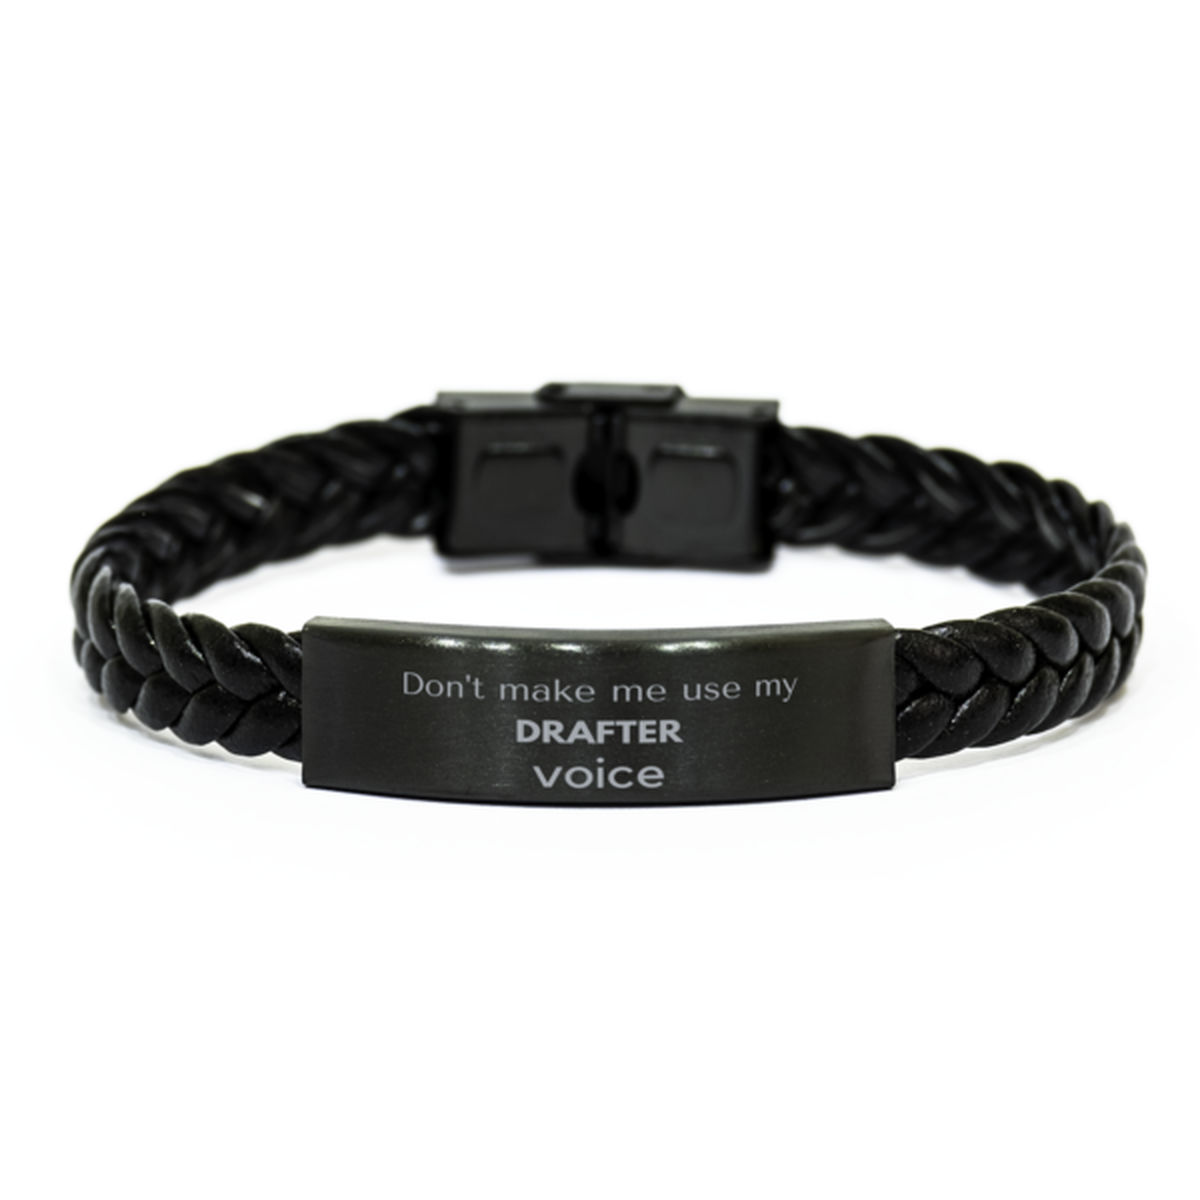 Don't make me use my Drafter voice, Sarcasm Drafter Gifts, Christmas Drafter Braided Leather Bracelet Birthday Unique Gifts For Drafter Coworkers, Men, Women, Colleague, Friends